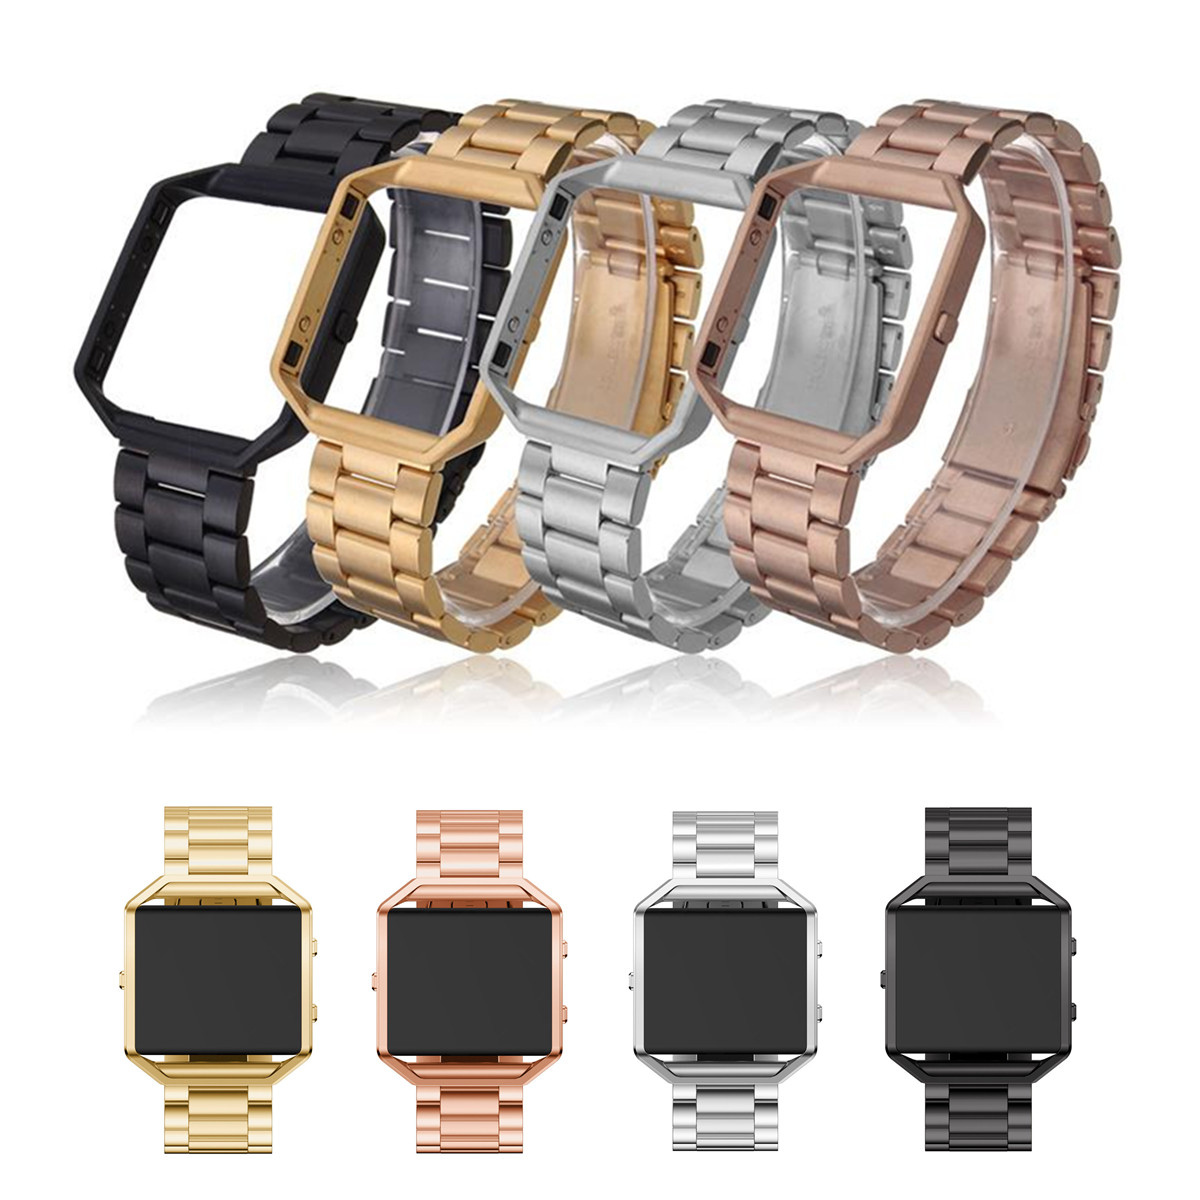 Find Bakeey Steel Metal Frame Watch Case Cover Frame Watch Band For Fitbit Blaze Watch for Sale on Gipsybee.com with cryptocurrencies